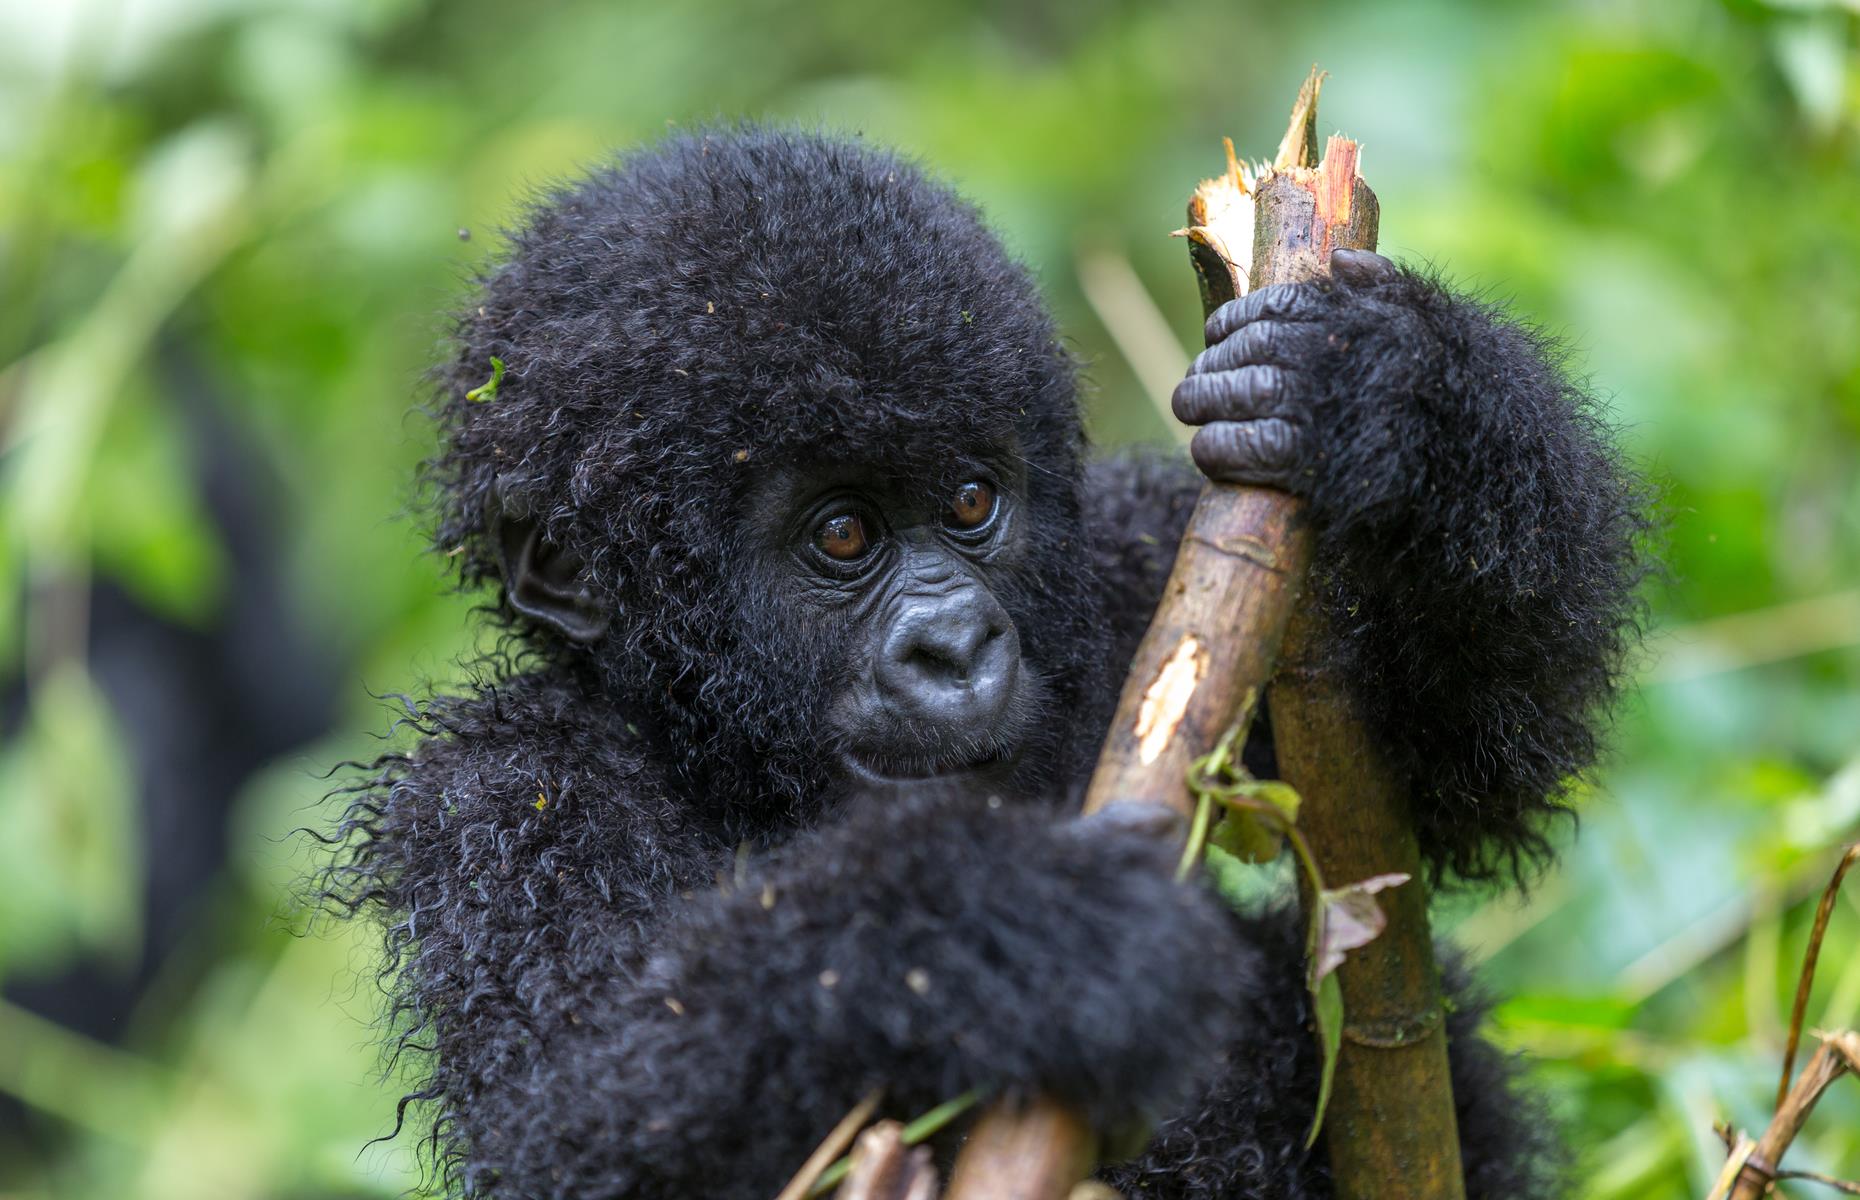 <p>DRC is one of only three countries in the world where you can see mountain gorillas in the wild. But in 2018, the Virunga National Park made the decision to close its doors to tourists after several of its rangers were brutally murdered by militiamen and poachers. Despite the ongoing threat of violence, many rangers continue to risk their lives to protect the gorillas. Although Virunga has since reopened, <a href="https://travel.state.gov/content/travel/en/traveladvisories/traveladvisories/democratic-republic-of-the-congo-travel-advisory.html#:~:text=Democratic%20Republic%20of%20the%20Congo%20%2D%20Level%203%3A%20Reconsider%20Travel&text=Last%20Update%3A%20Reissued%20with%20updates,Some%20areas%20have%20increased%20risk.">current US Department of State advice is to reconsider travel to the DRC</a>.</p>